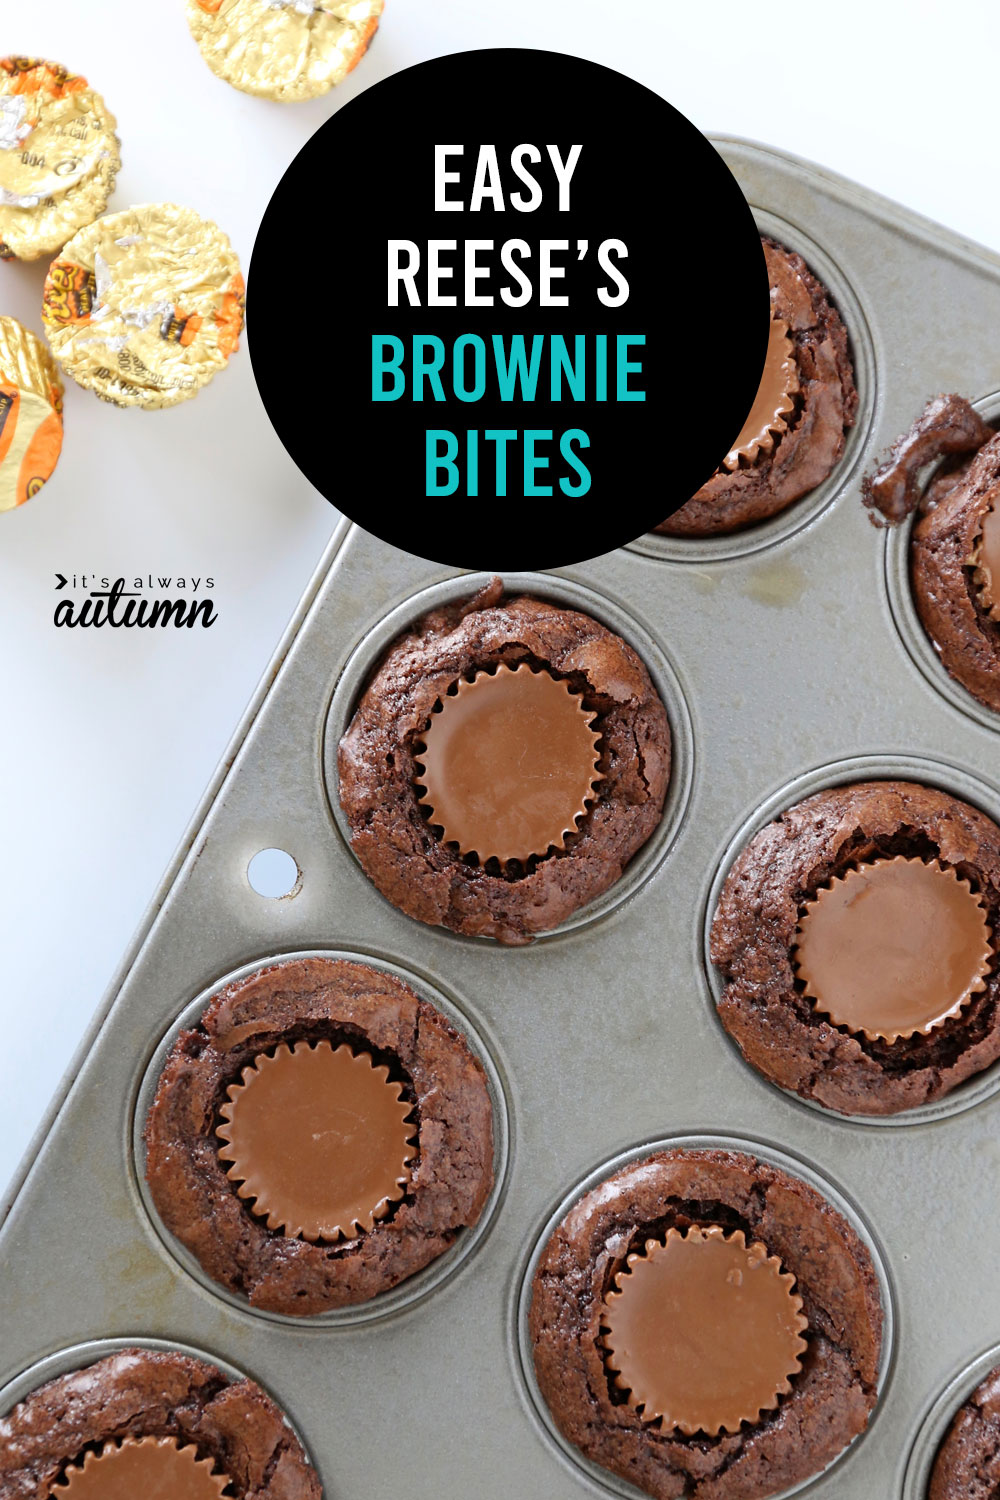 These peanut butter cup brownie bites are so easy to make and so delicious!